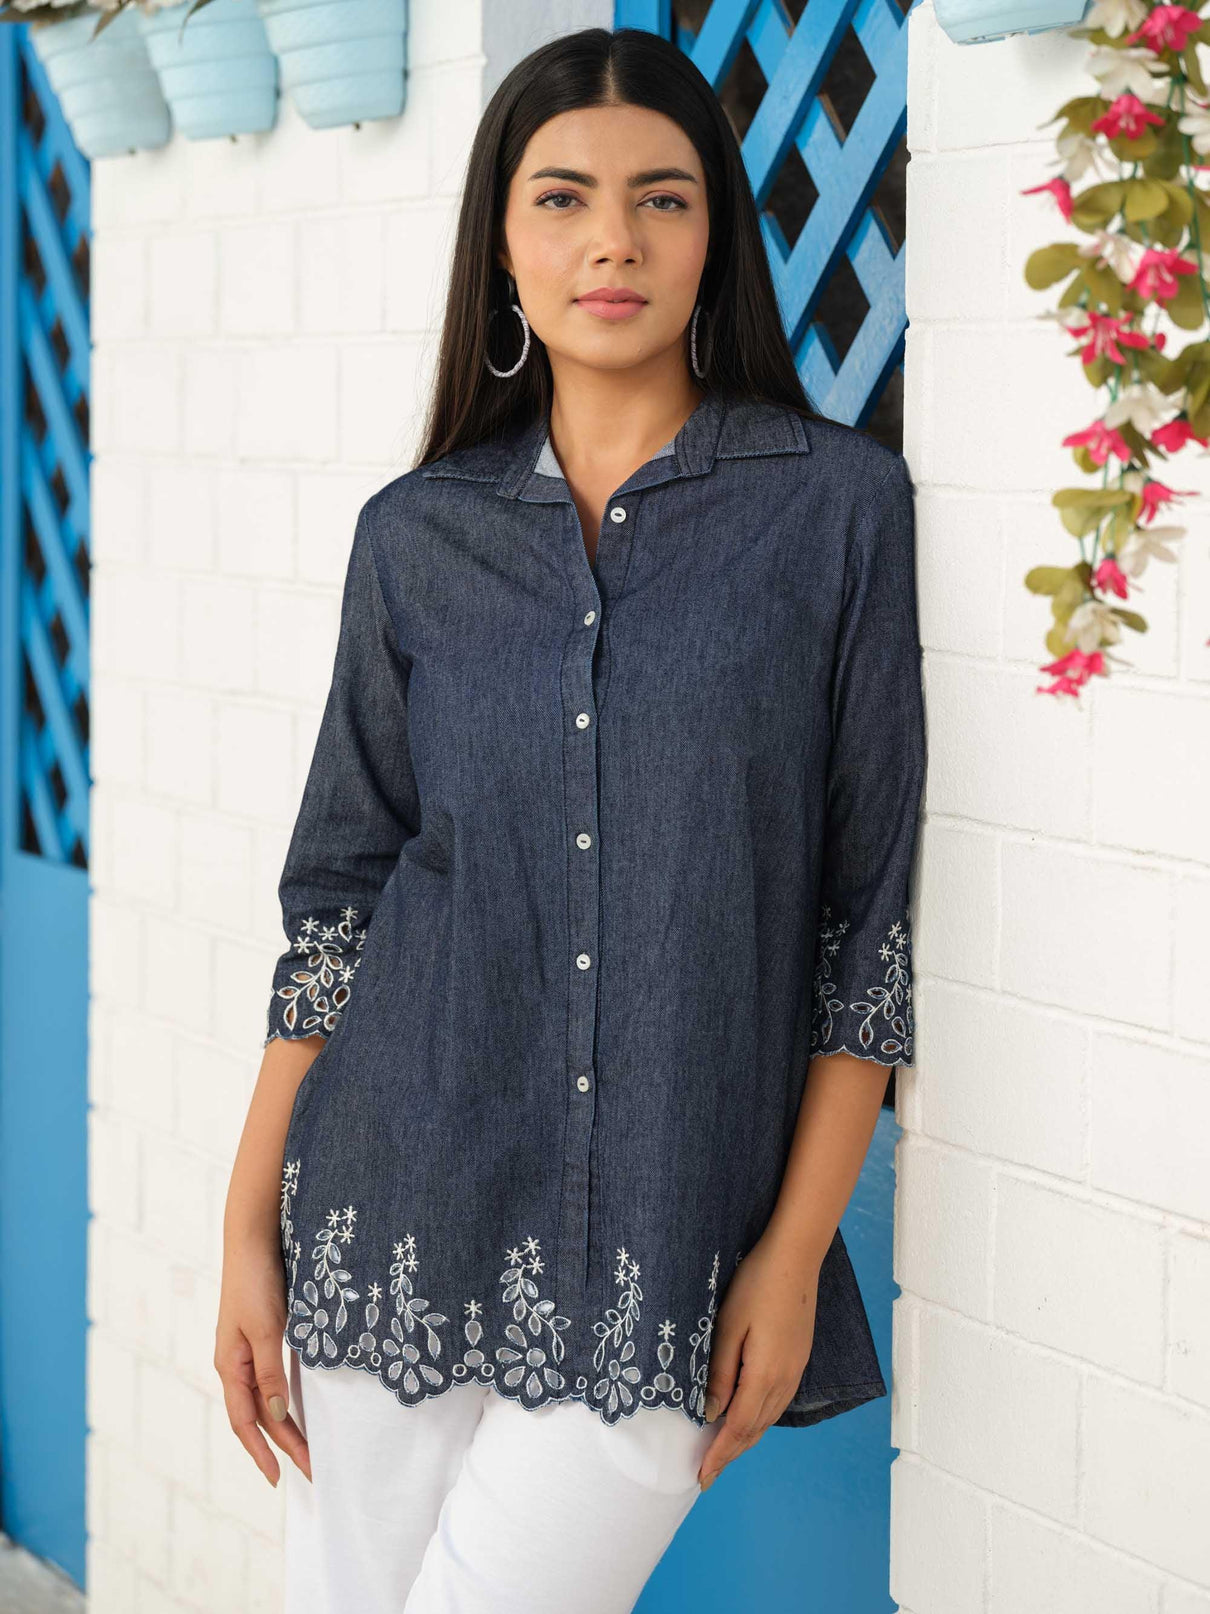 Shirt Collar Denim Top With Cutwork Embroidery Etiquette Apparel